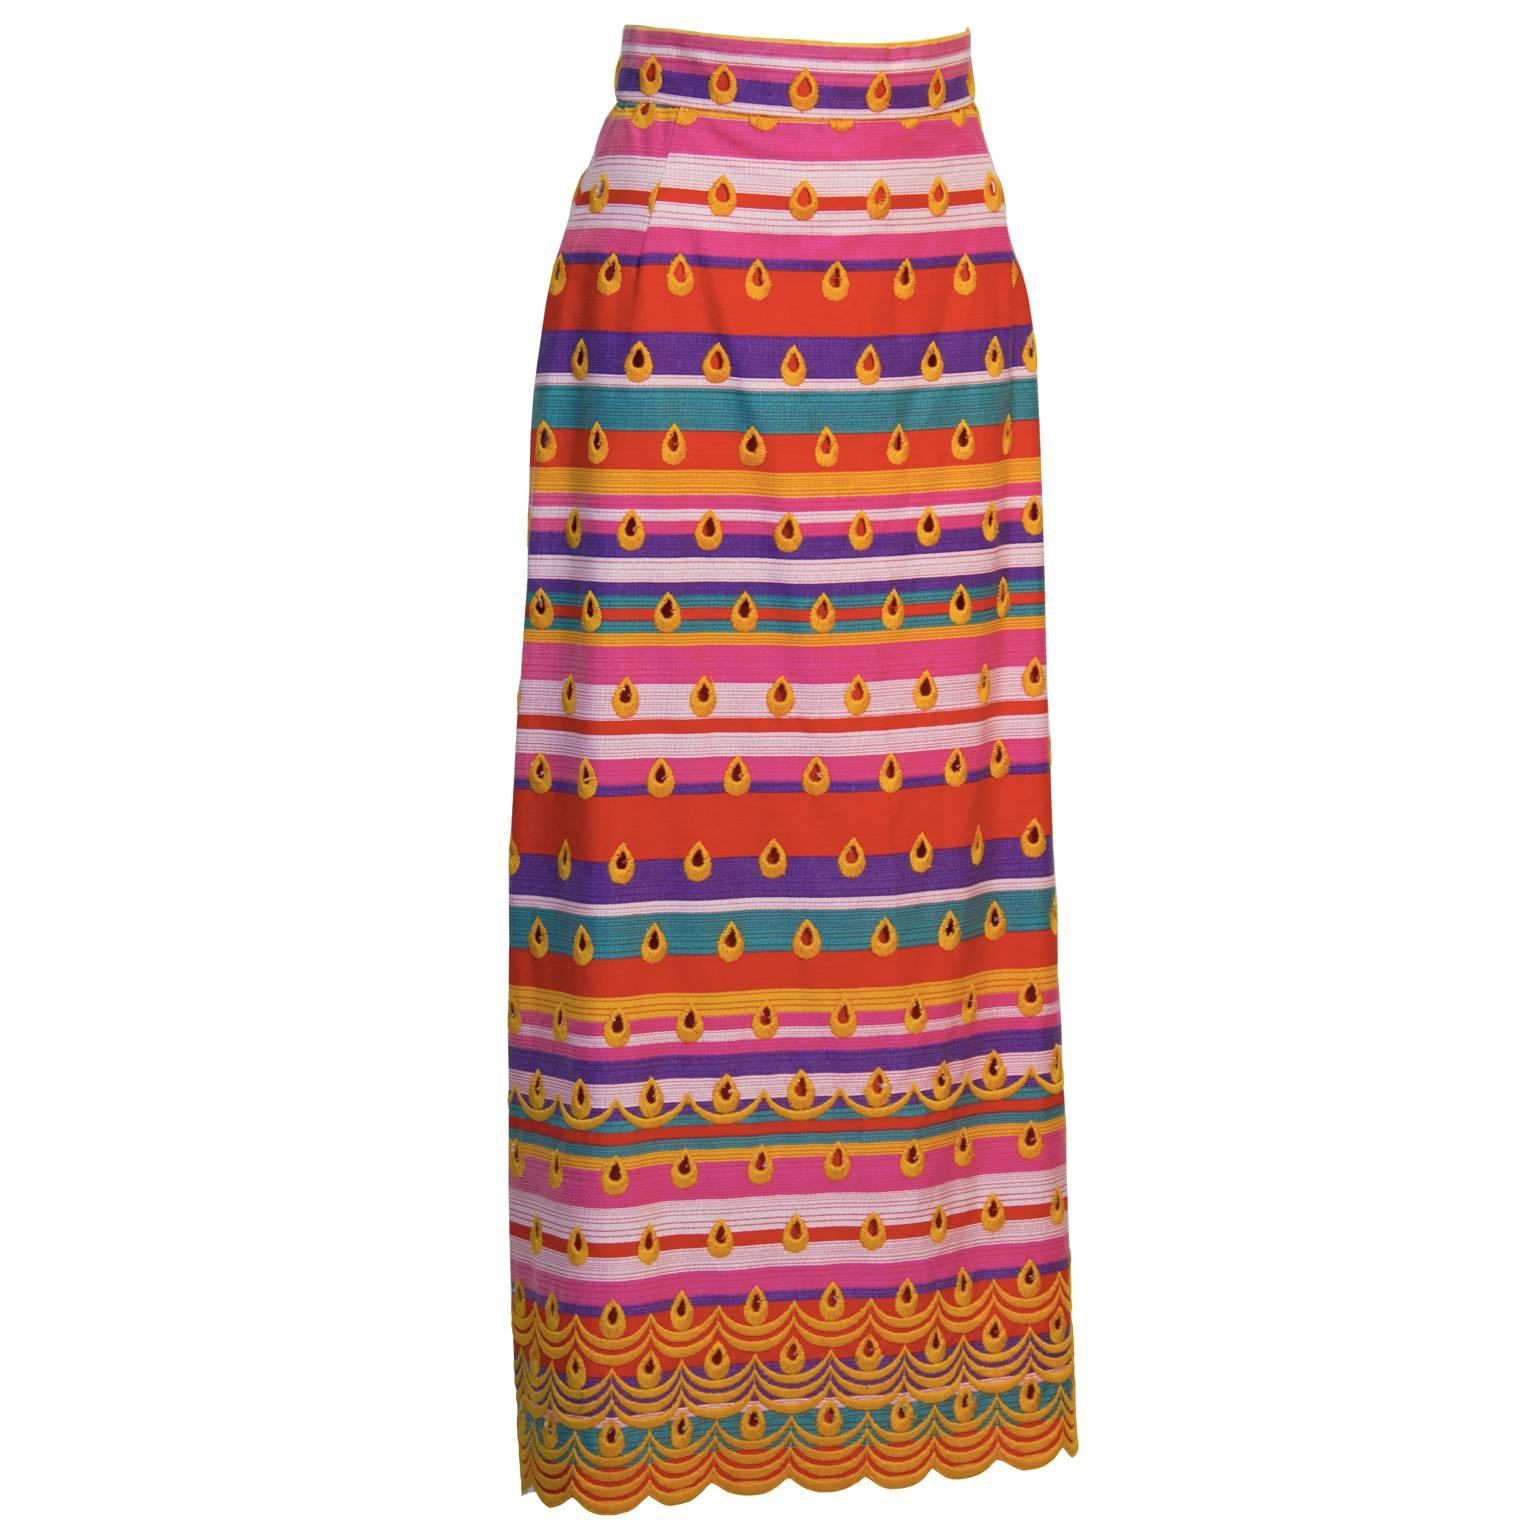 This is a unique and decorative Morton Myles for Malcolm Charles multi color BOHO maxi skirt from the 1970's. Made with a vibrant striped fabric in red, pink, magenta, purple, orange and turquoise. Detailed with yellow hand embroidery in a teardrop